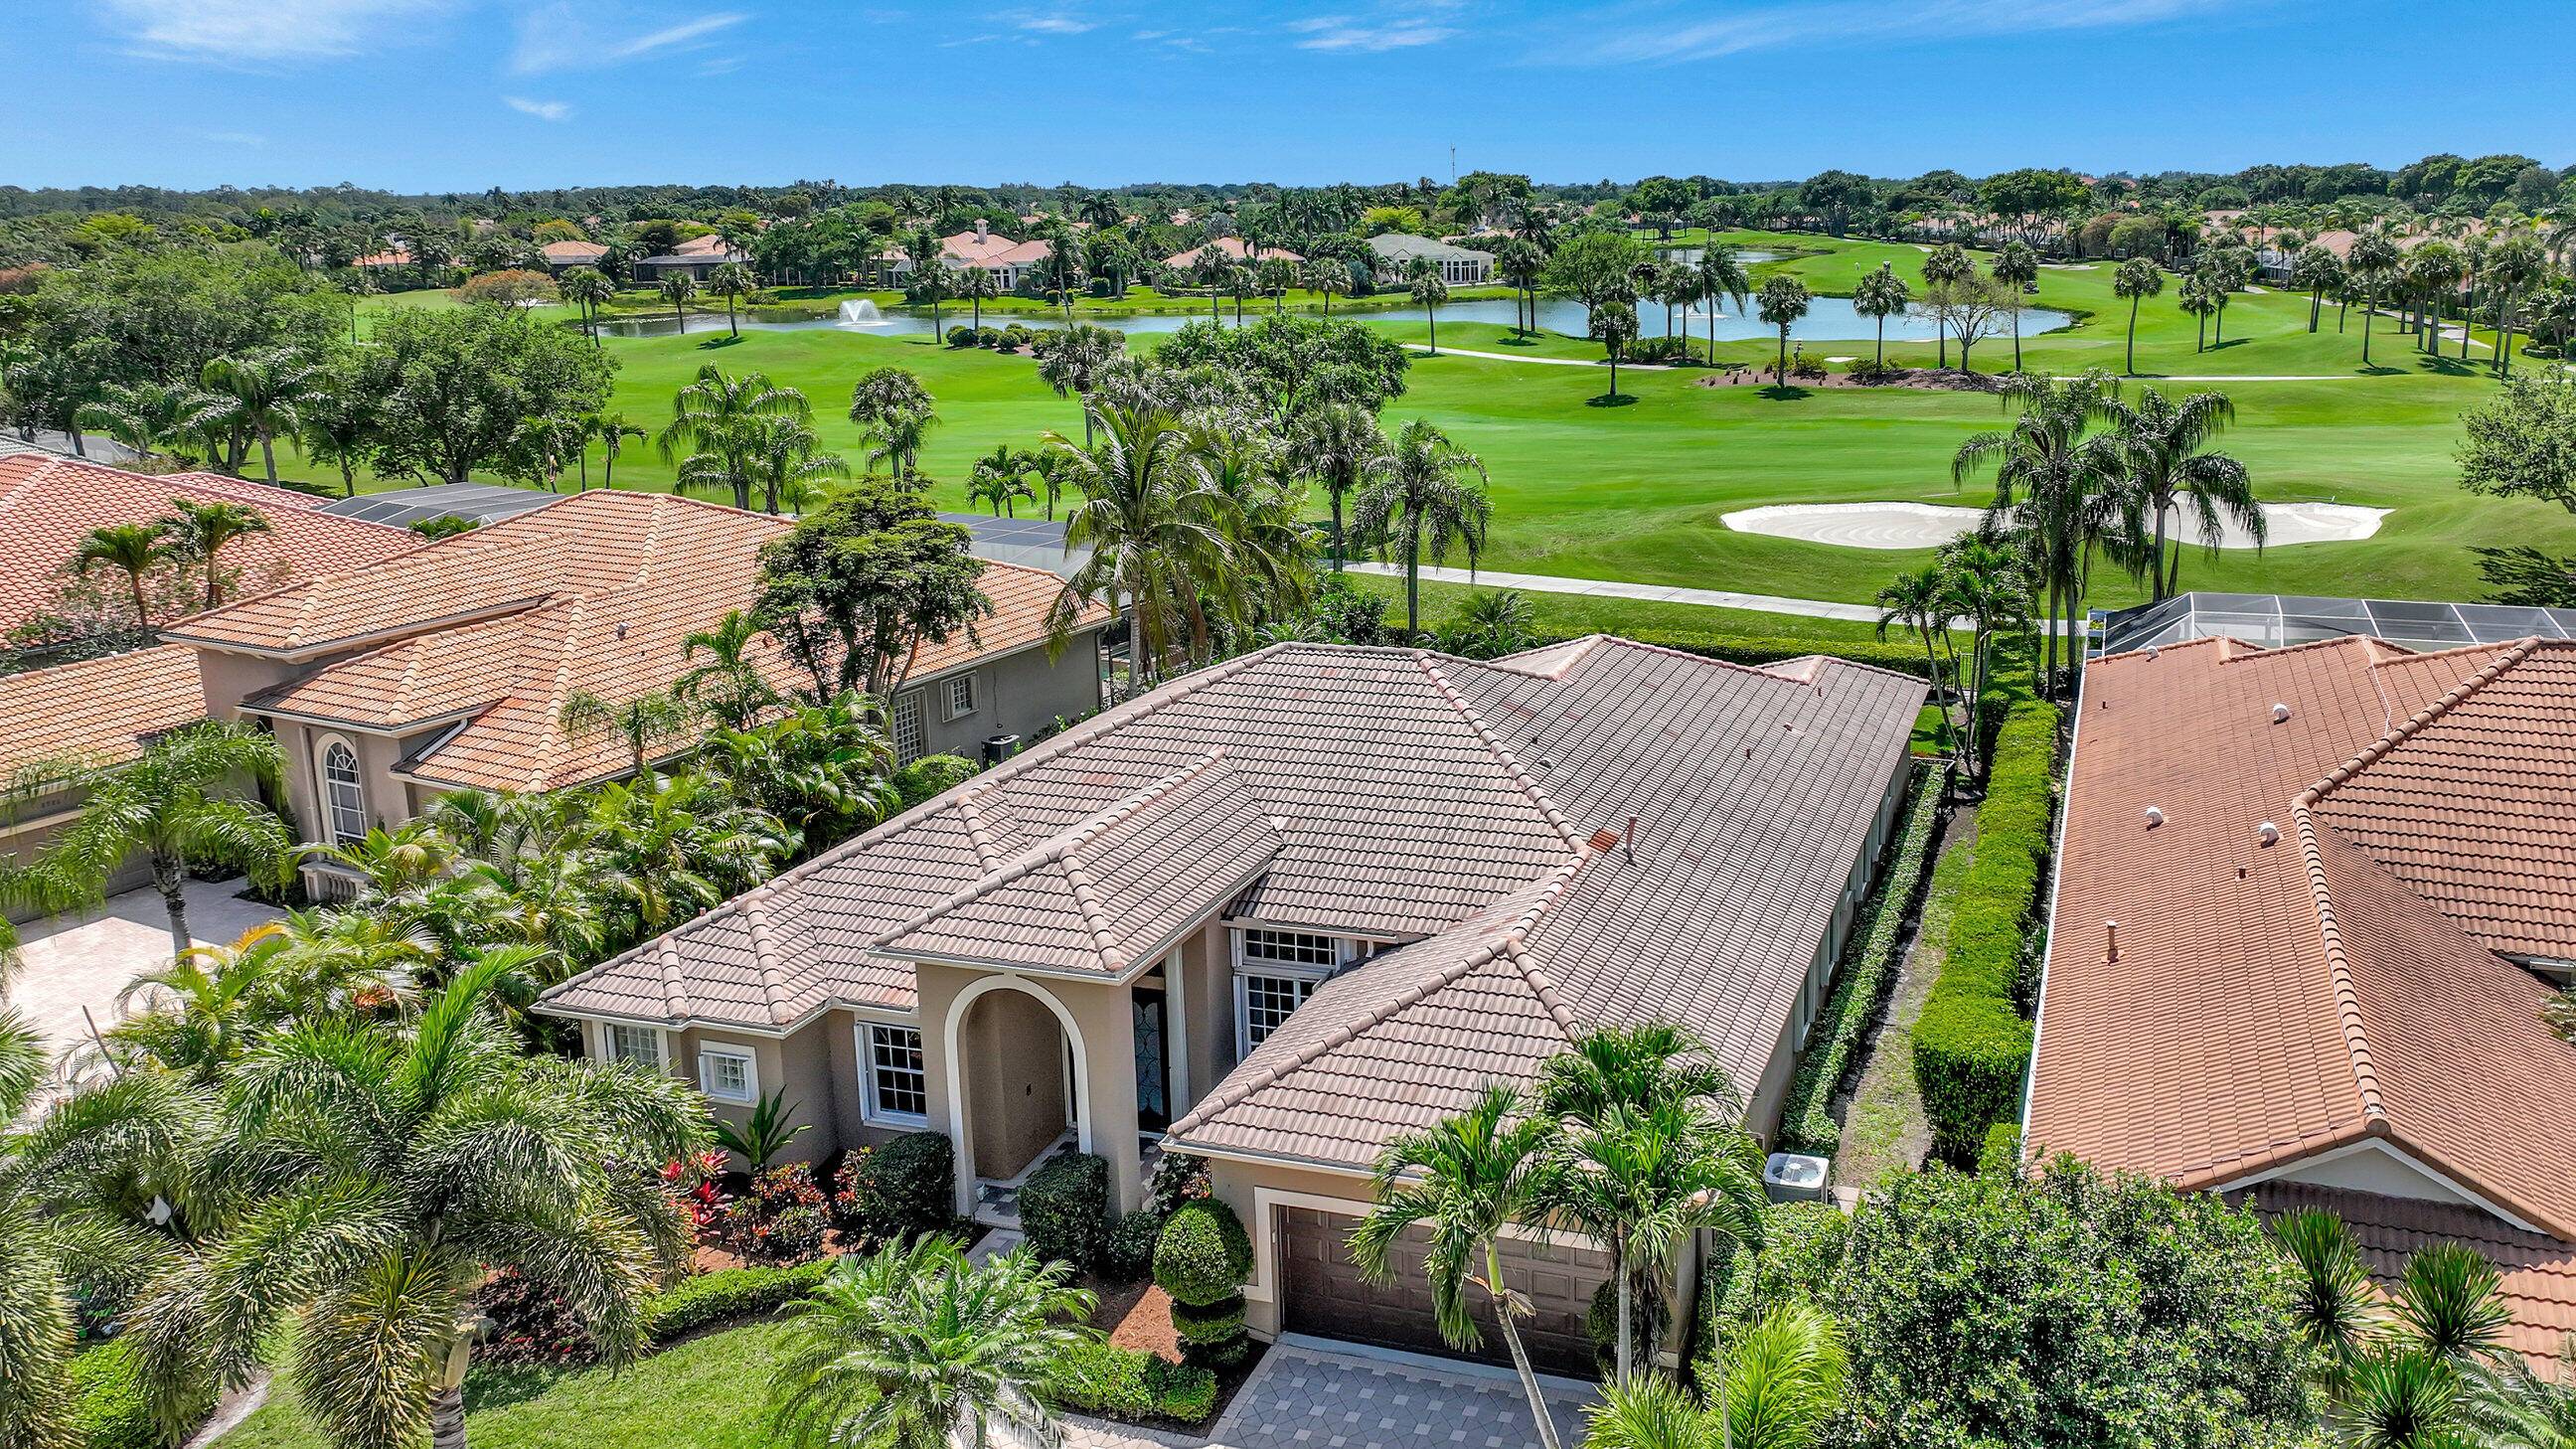 Nestled on a picturesque street within a coveted golf course community, this beautiful home offers a blend of luxury, comfort, and golf course views.